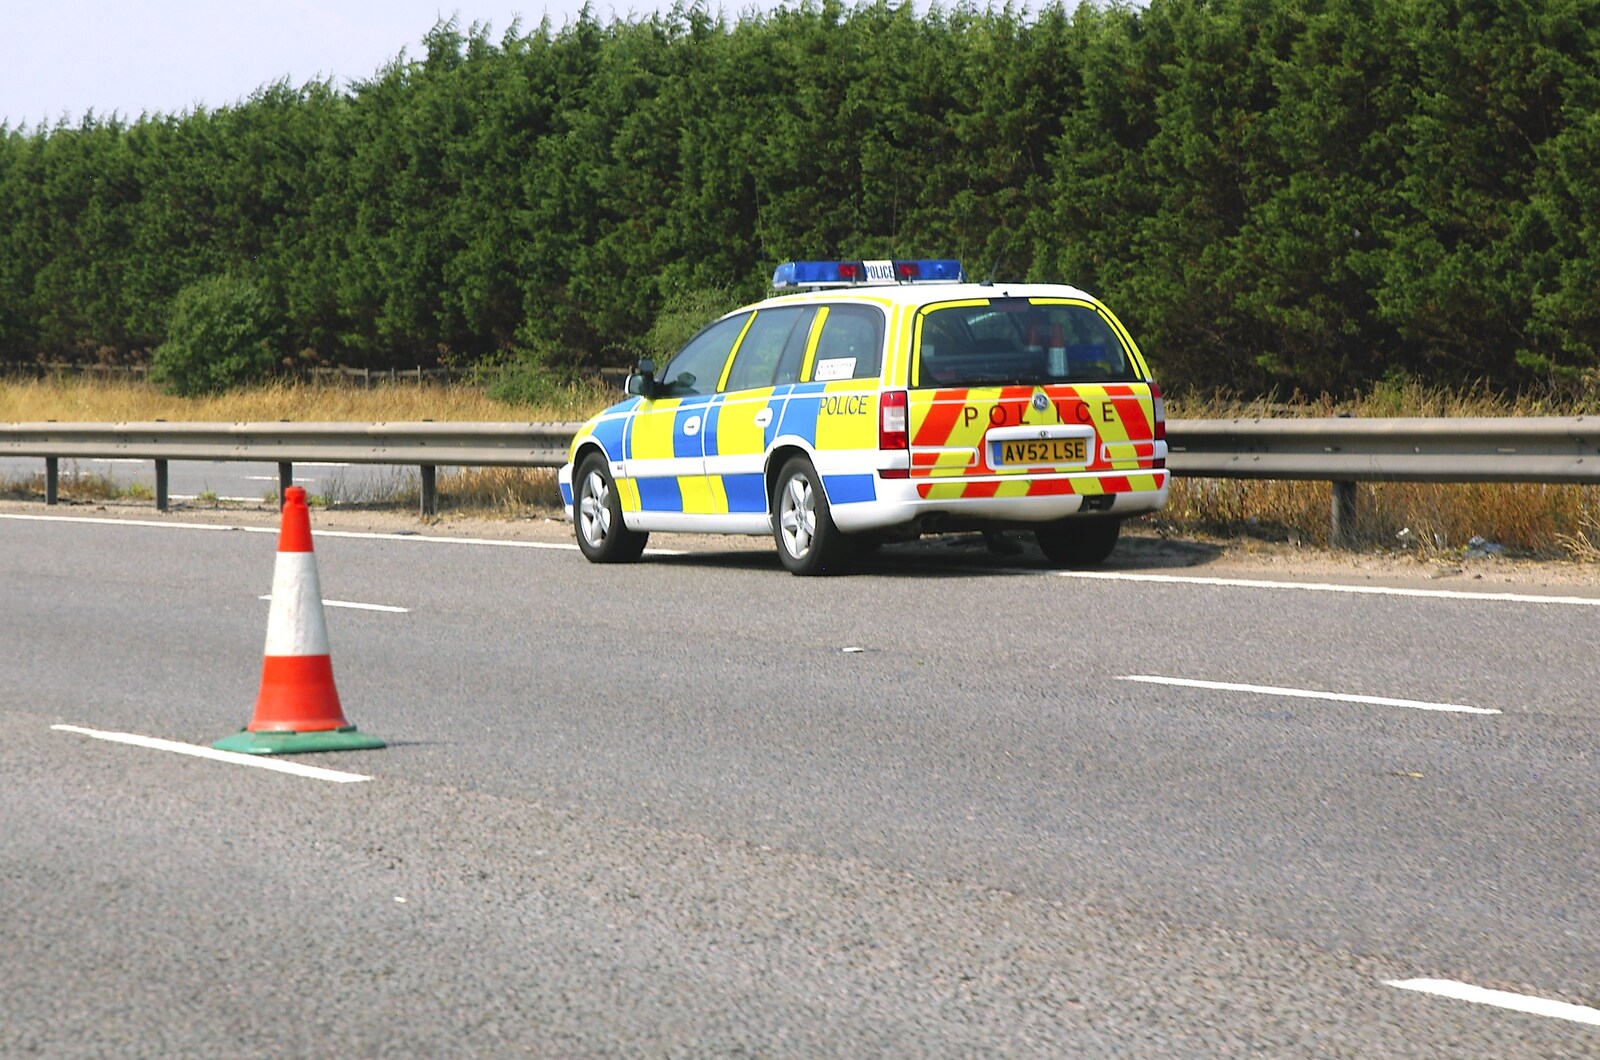 The coppers cordon off huge swathes of road from Shakespeare at St. John's, Parker's Piece and the A14's Worst Day - 17th July 2006